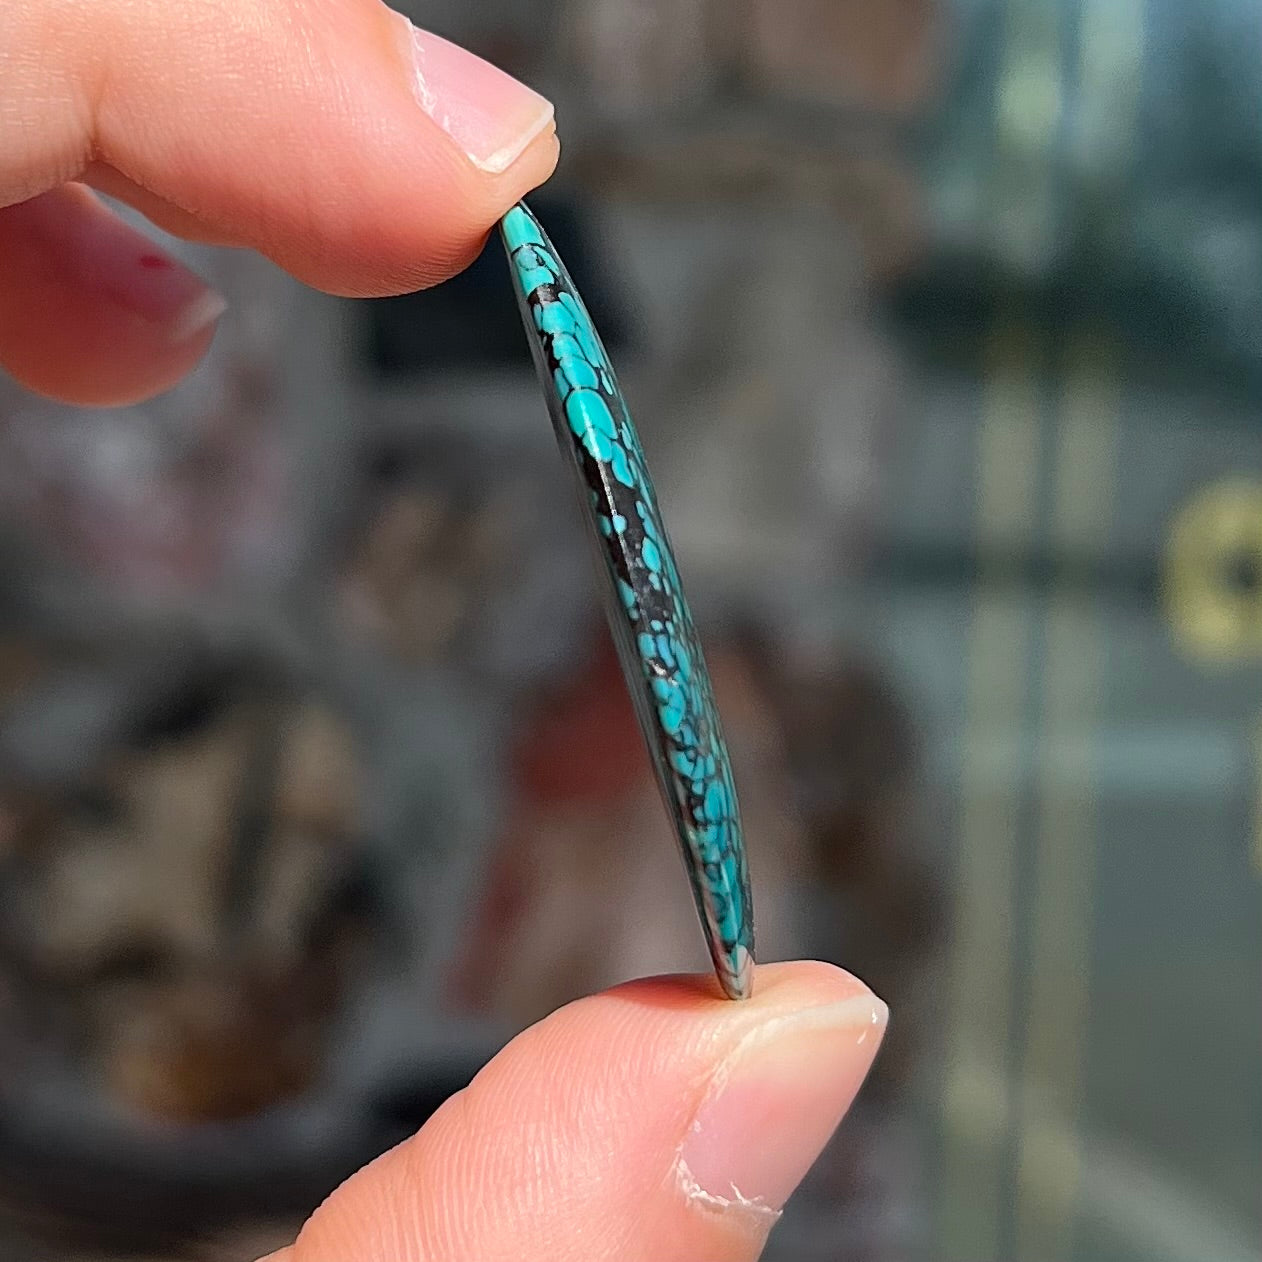 A polished, freeform shaped spiderweb turquoise cabochon from Lone Mountain Mine in Esmeralda County, Nevada.